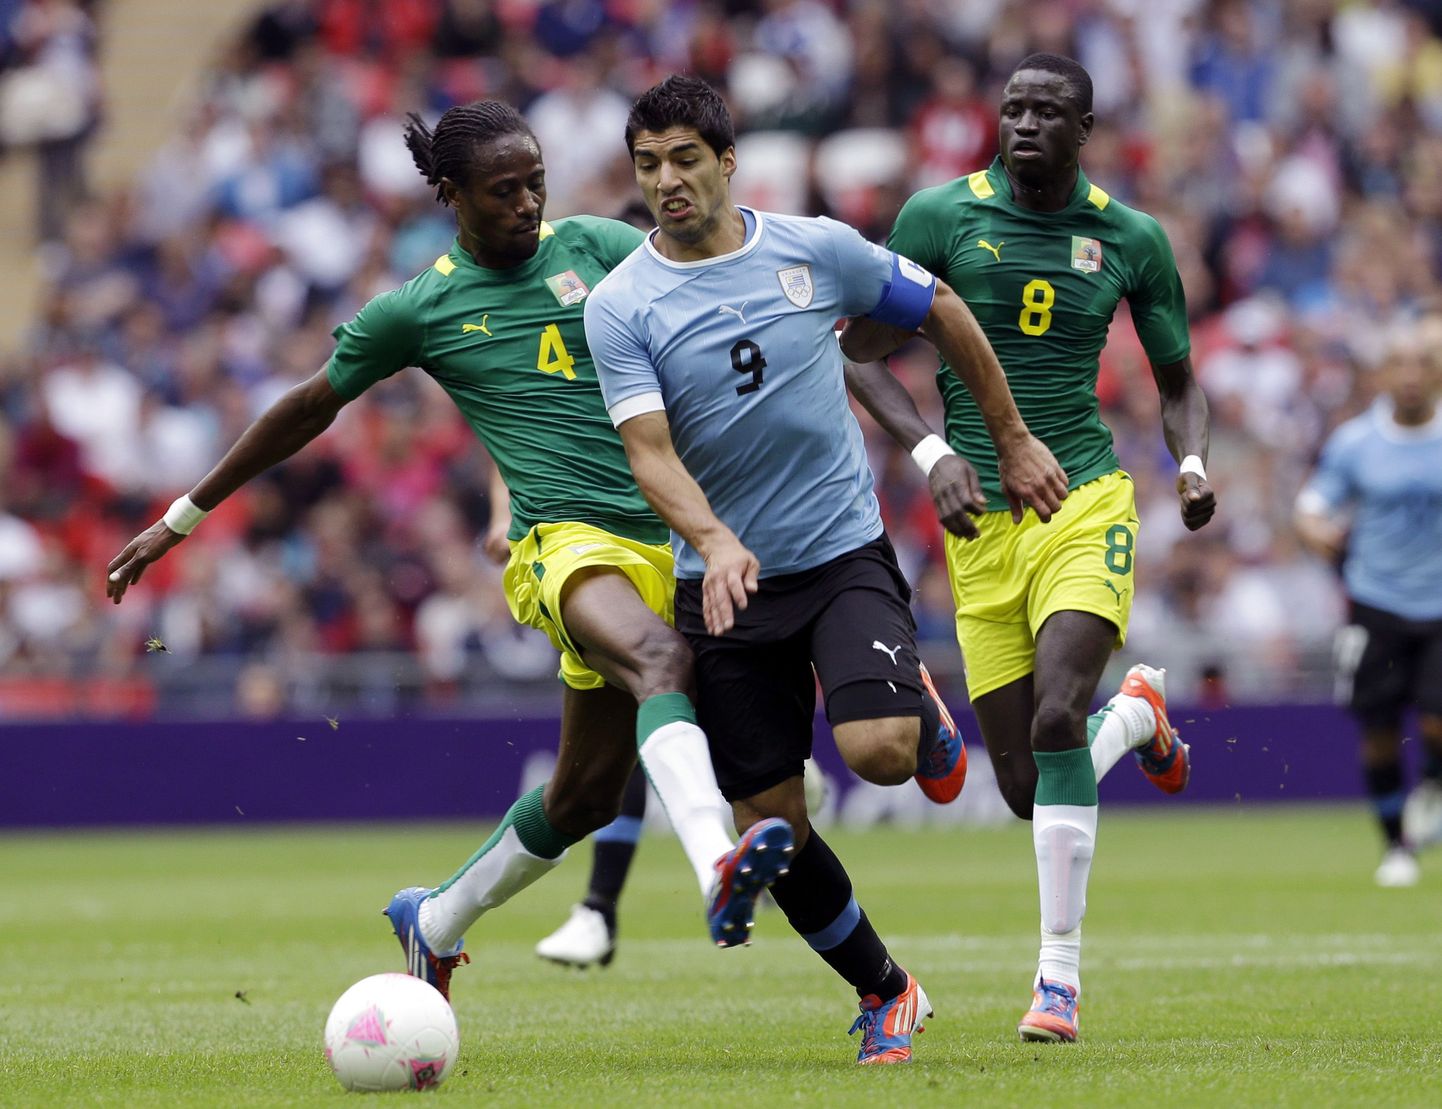 Uruguay's Luis Suarez (9) is tackled by Senegal's Abdoulaye Ba (4) as Senegal's Cheikhou Kouyate (8) watches, resulting in a red card for Ba during a men's first-round group A soccer match at the 2012 Summer Olympics, Sunday, July 29, 2012, at Wembley Stadium in London. (AP Photo/Ben Curtis) / SCANPIX Code: 436